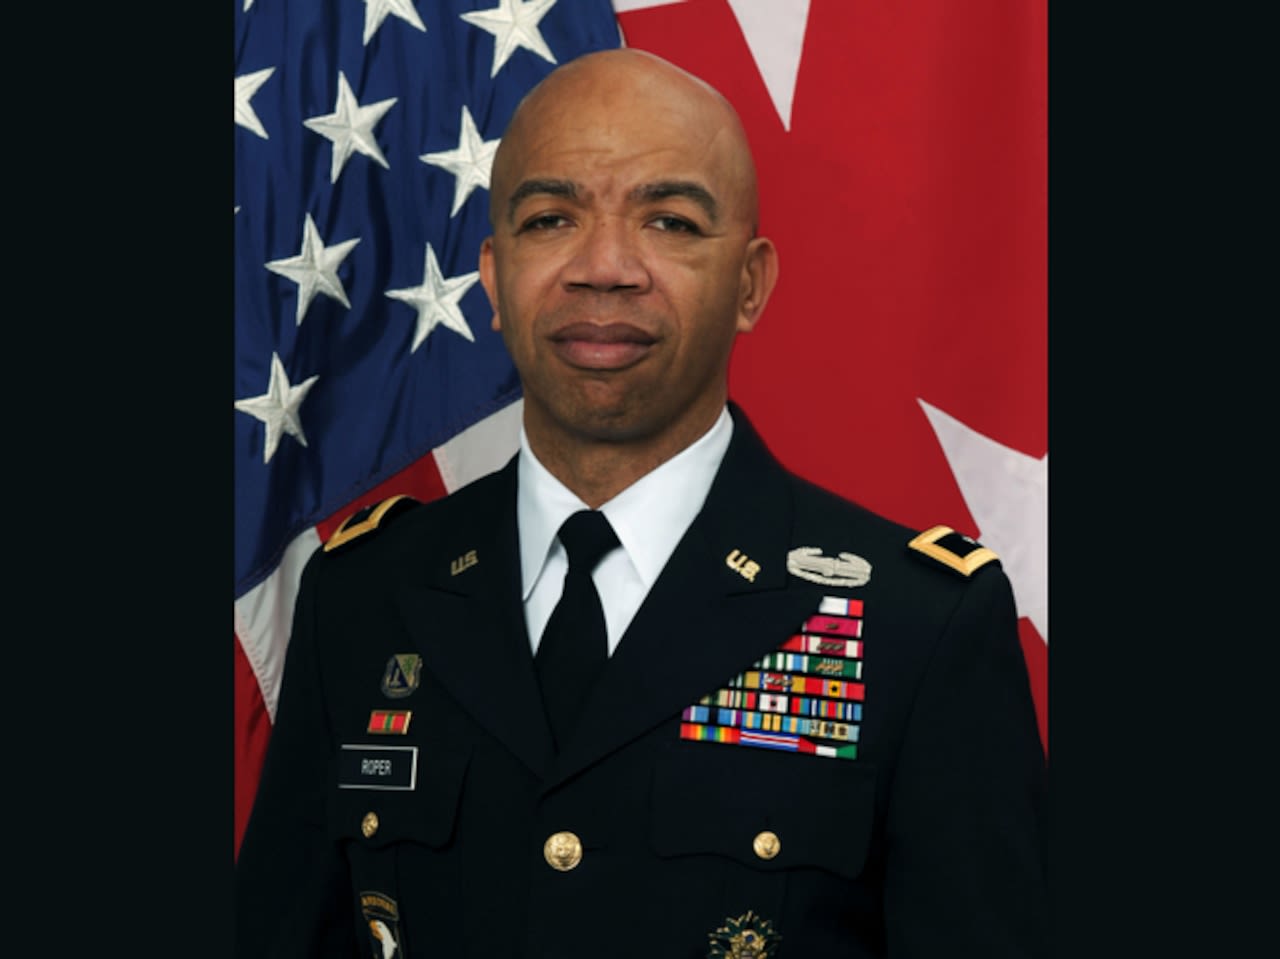 Former Birmingham police chief, US Army Reserve’s 1st Black lieutenant general, retires from military